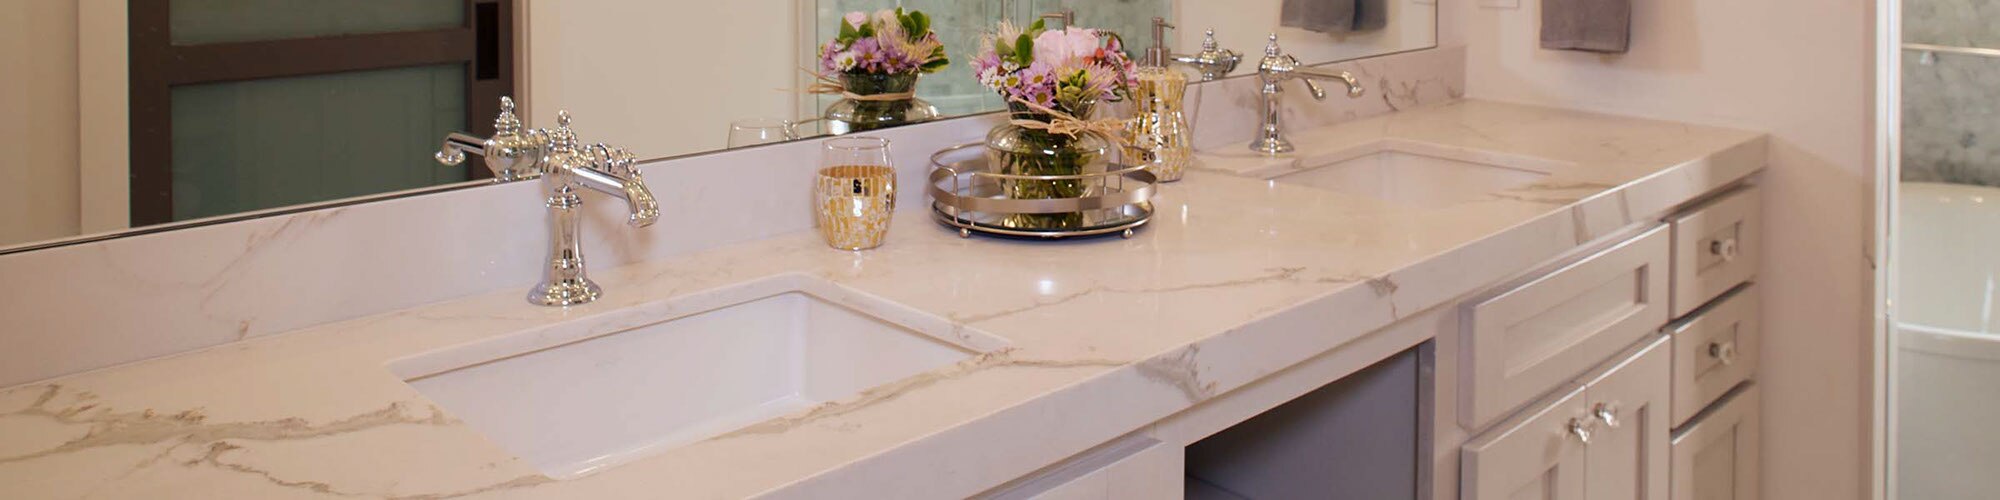 Bathroom with white marble-look quartz countertop, dual under-mount sinks, polished silver faucets, and white cabinets.